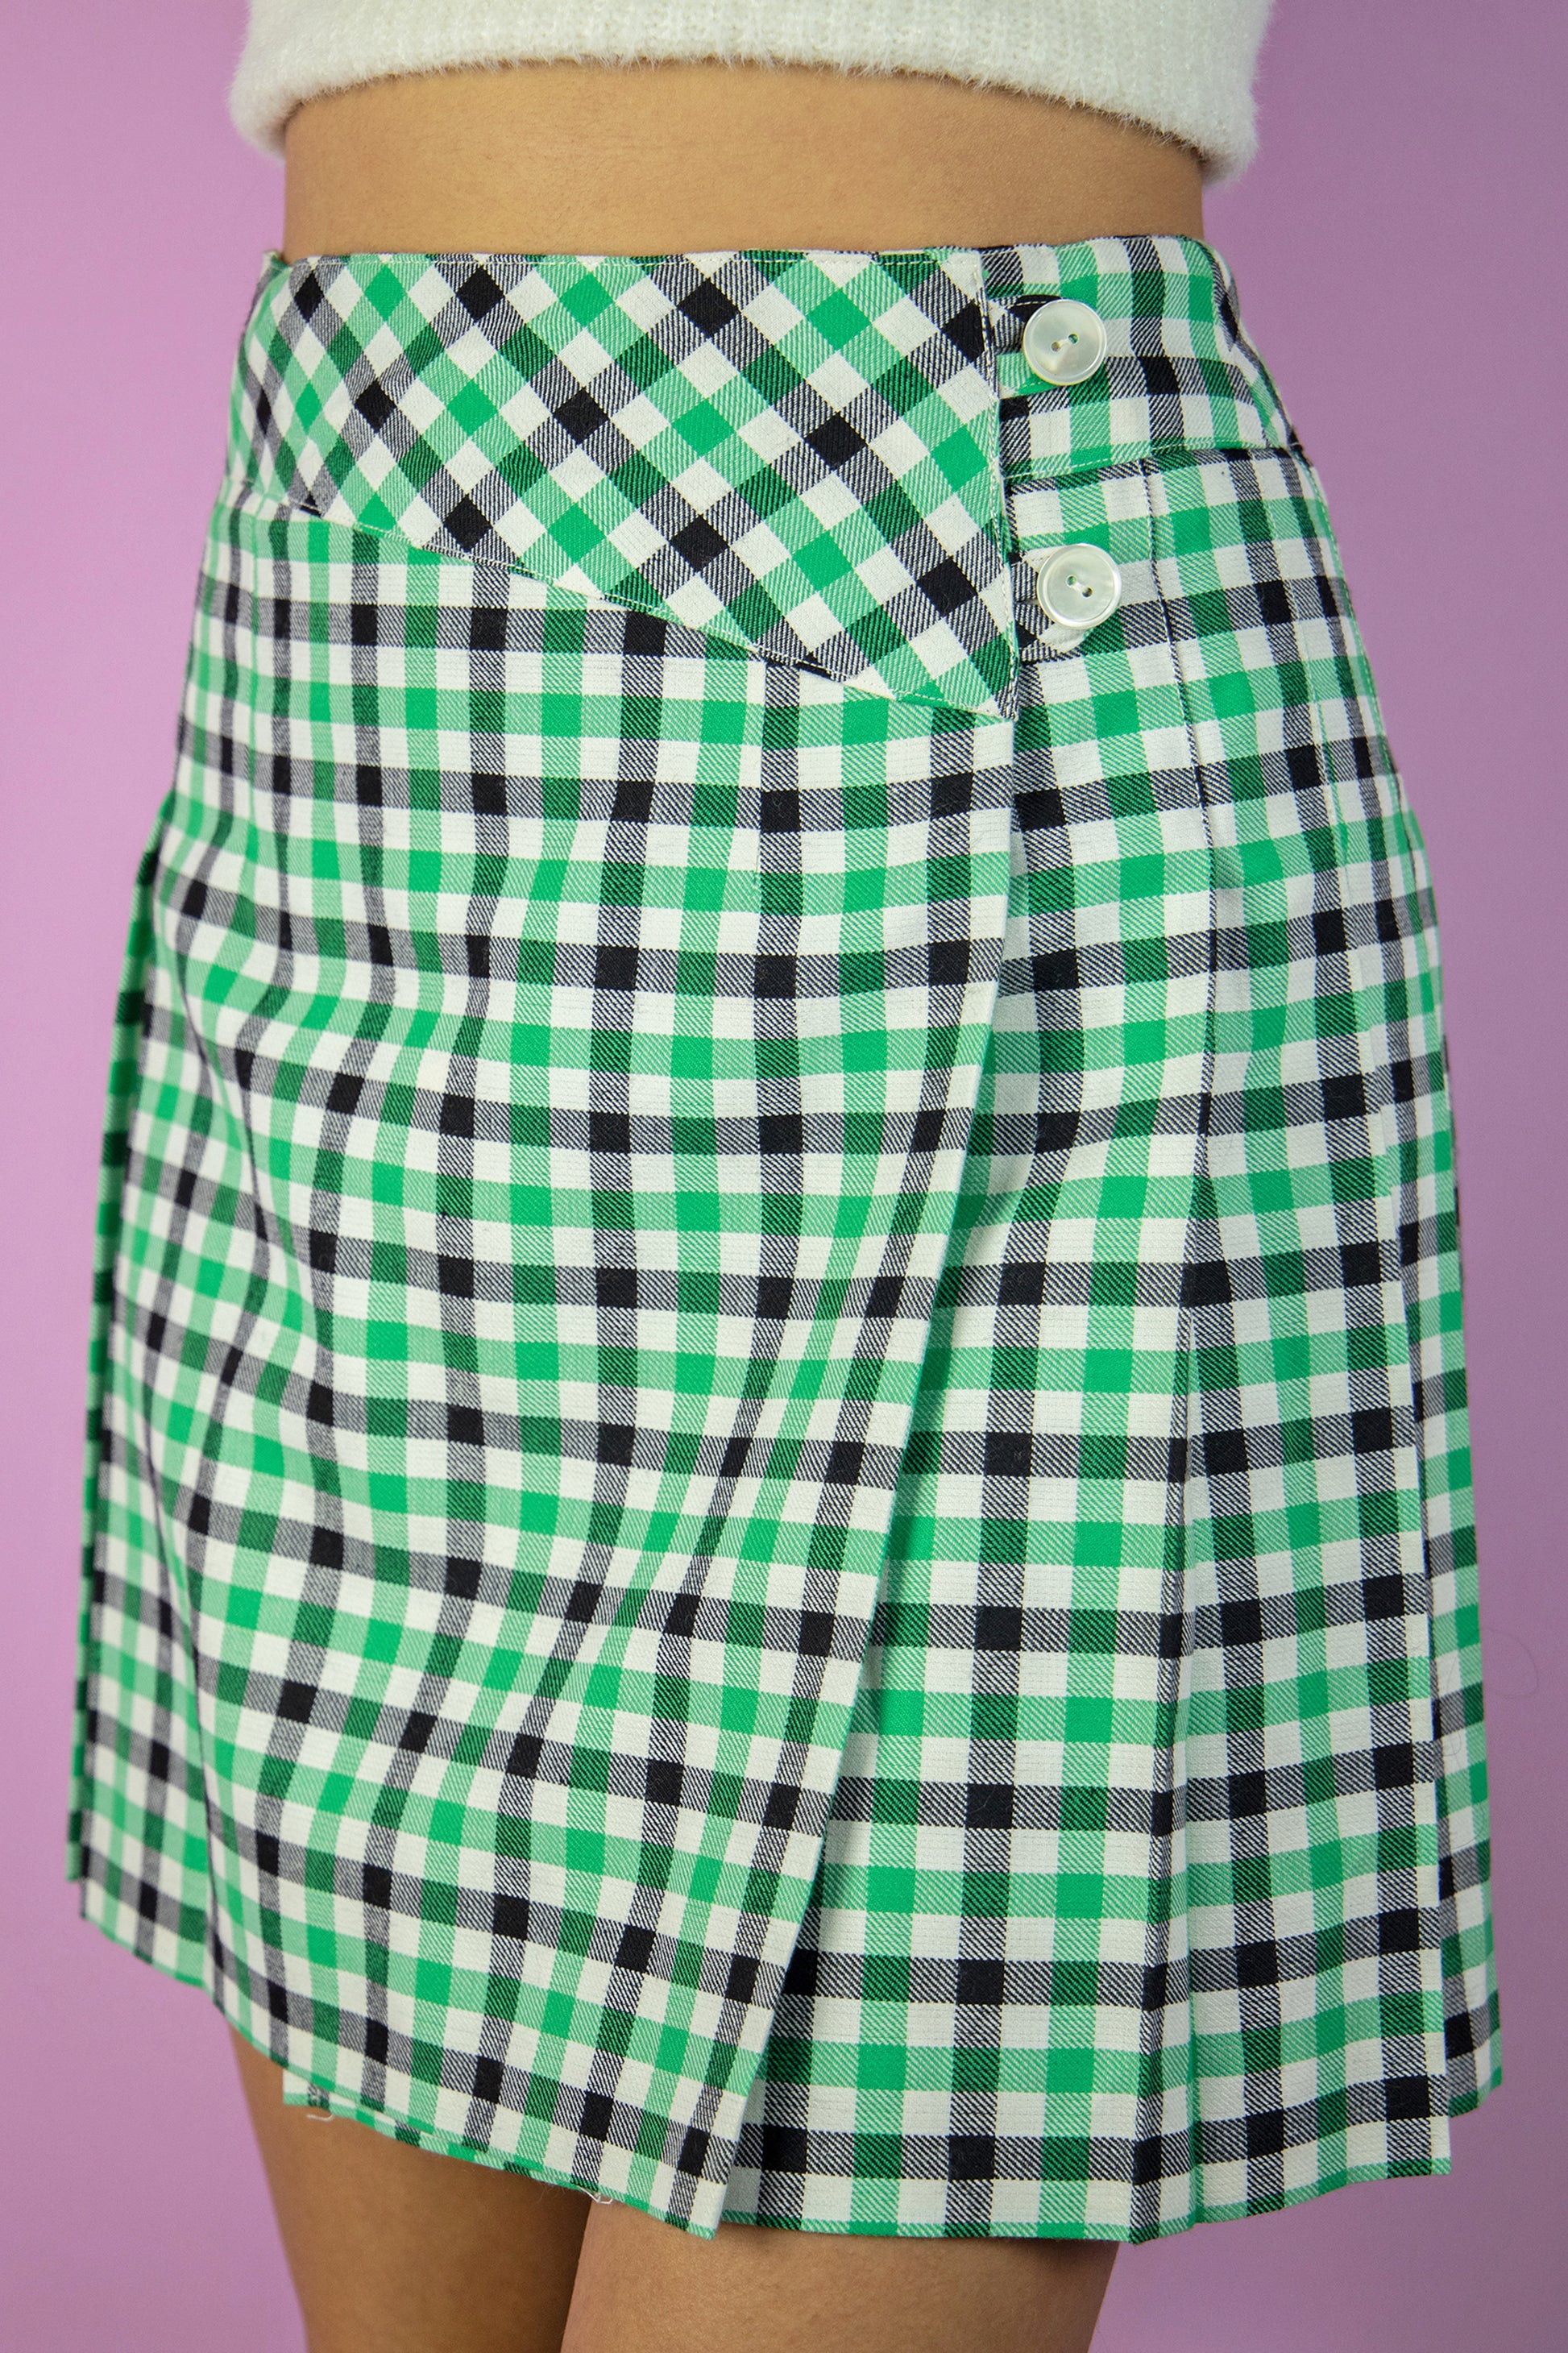 The Vintage 80s Check Pleated Mini Skirt is a classic preppy style green, black and white plaid pleated wrap mini skirt with side button closure.